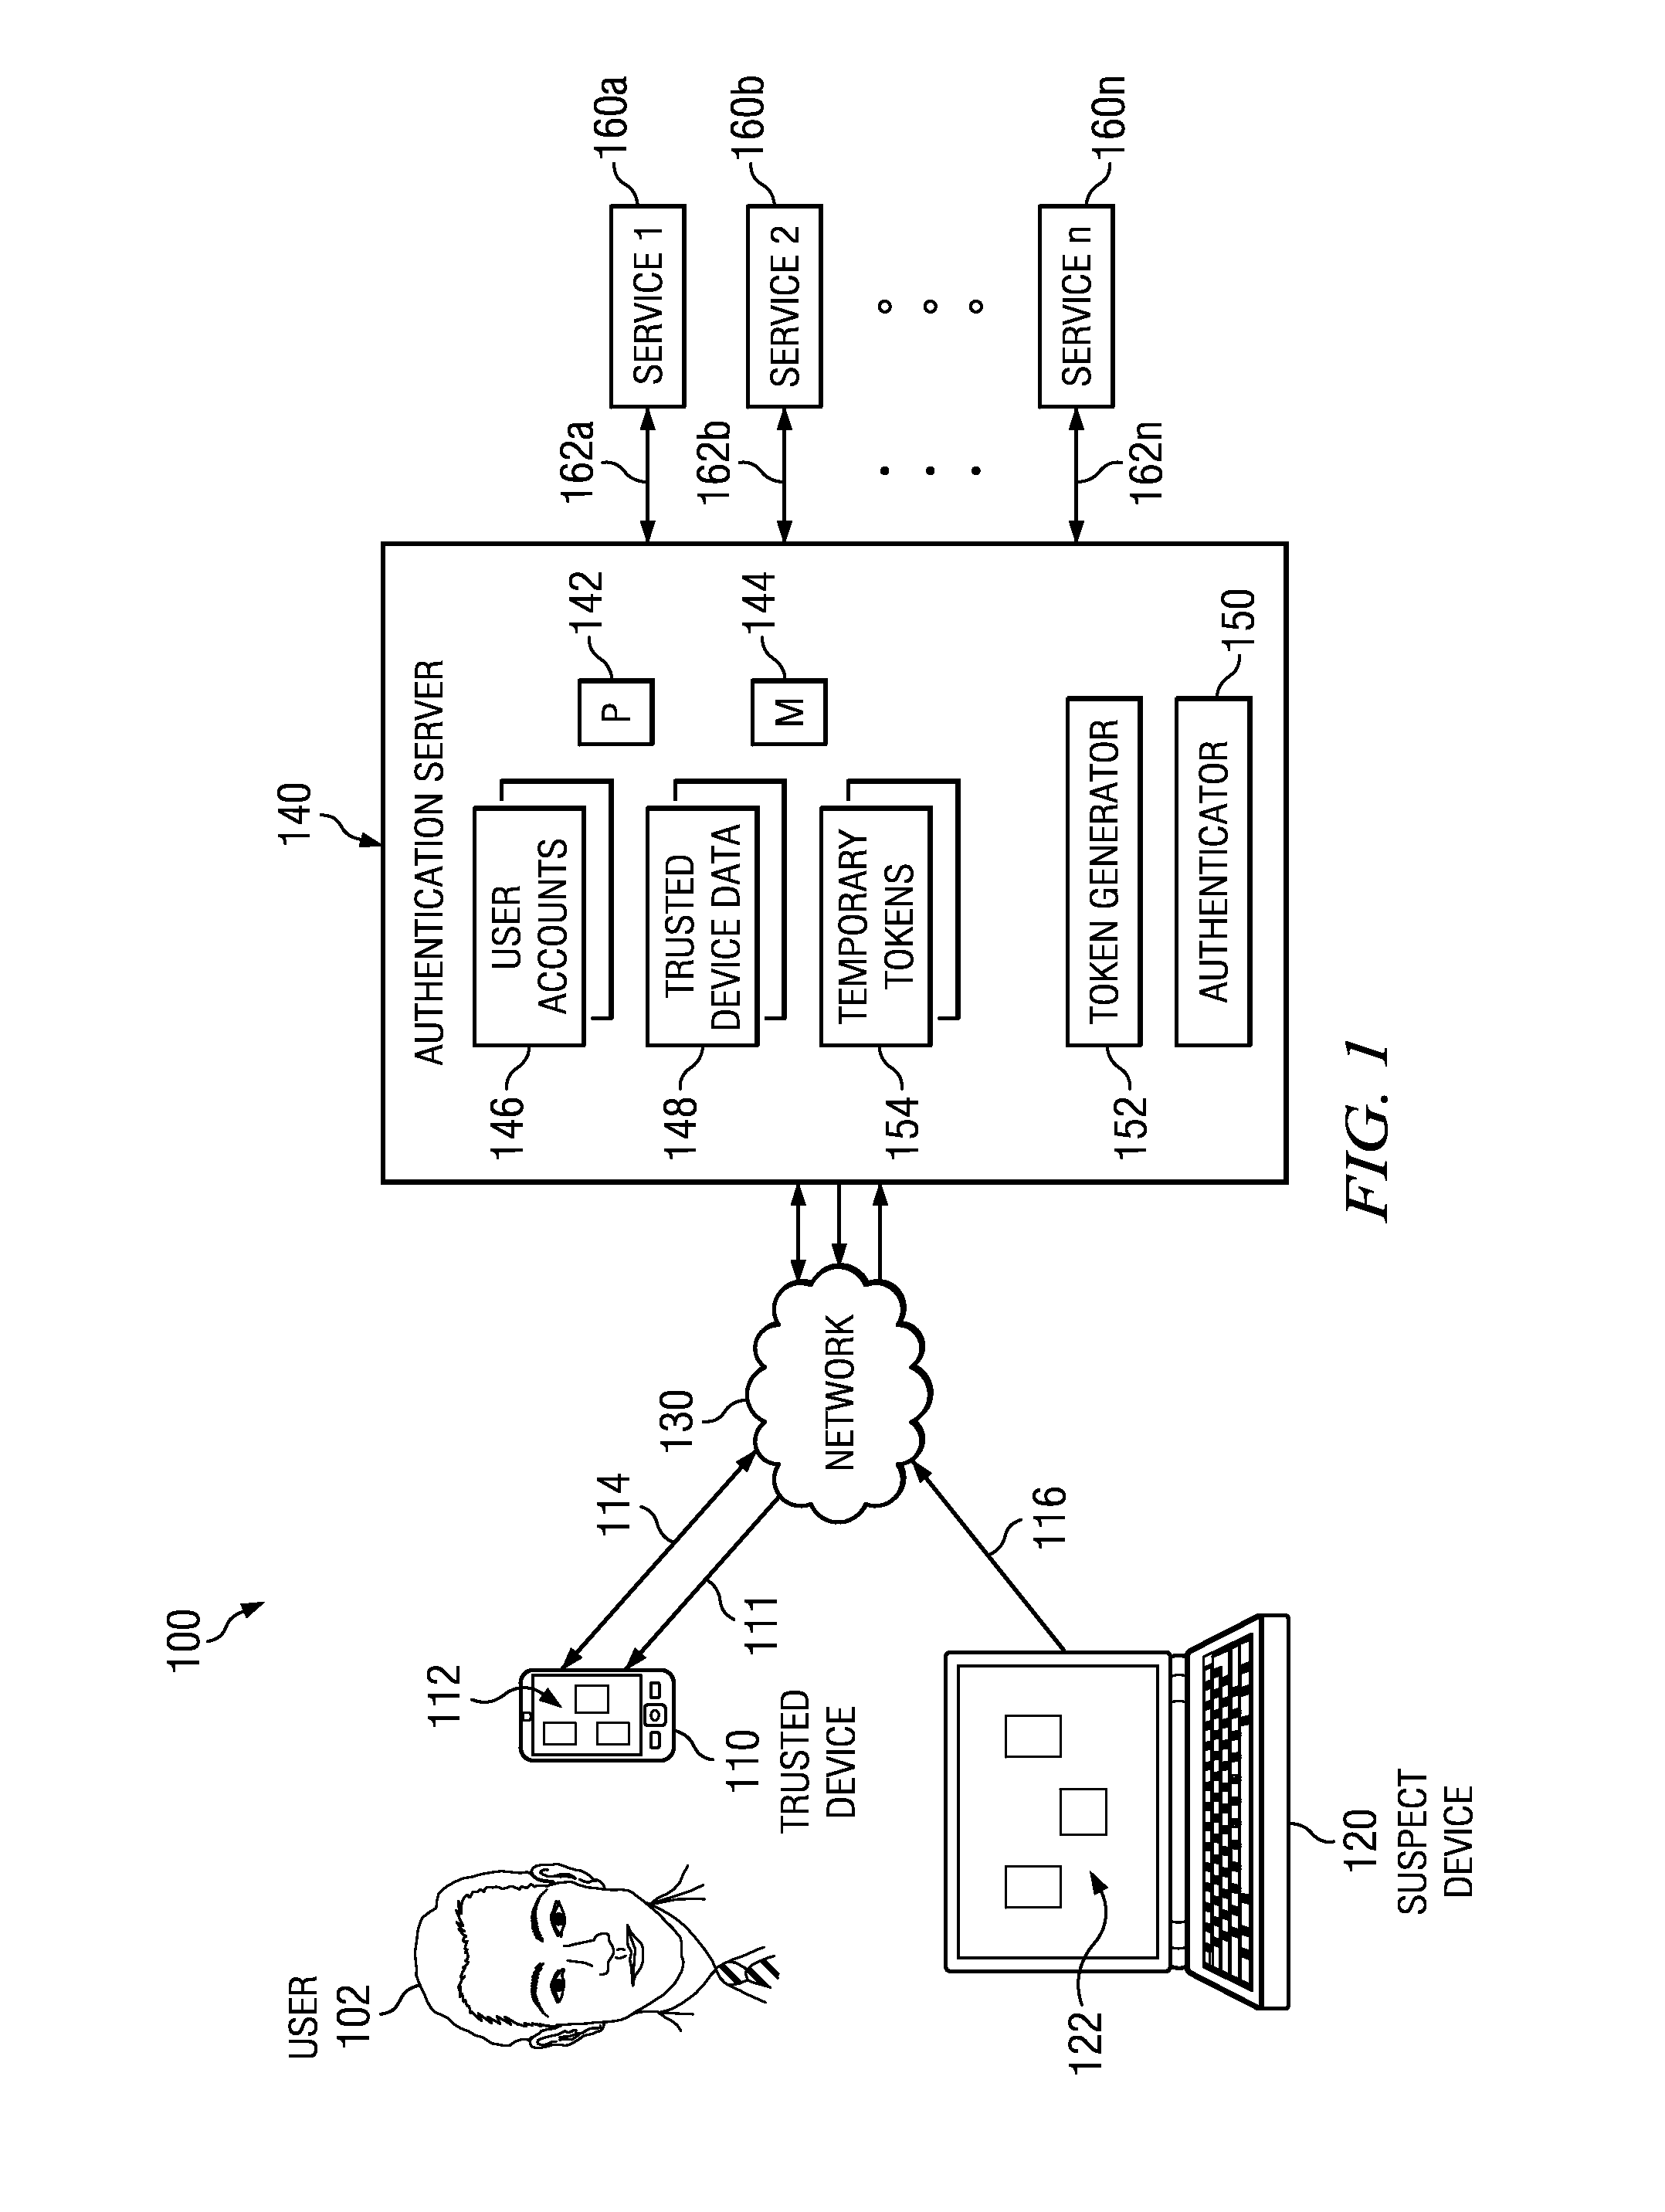 System and Method for Authenticating Suspect Devices